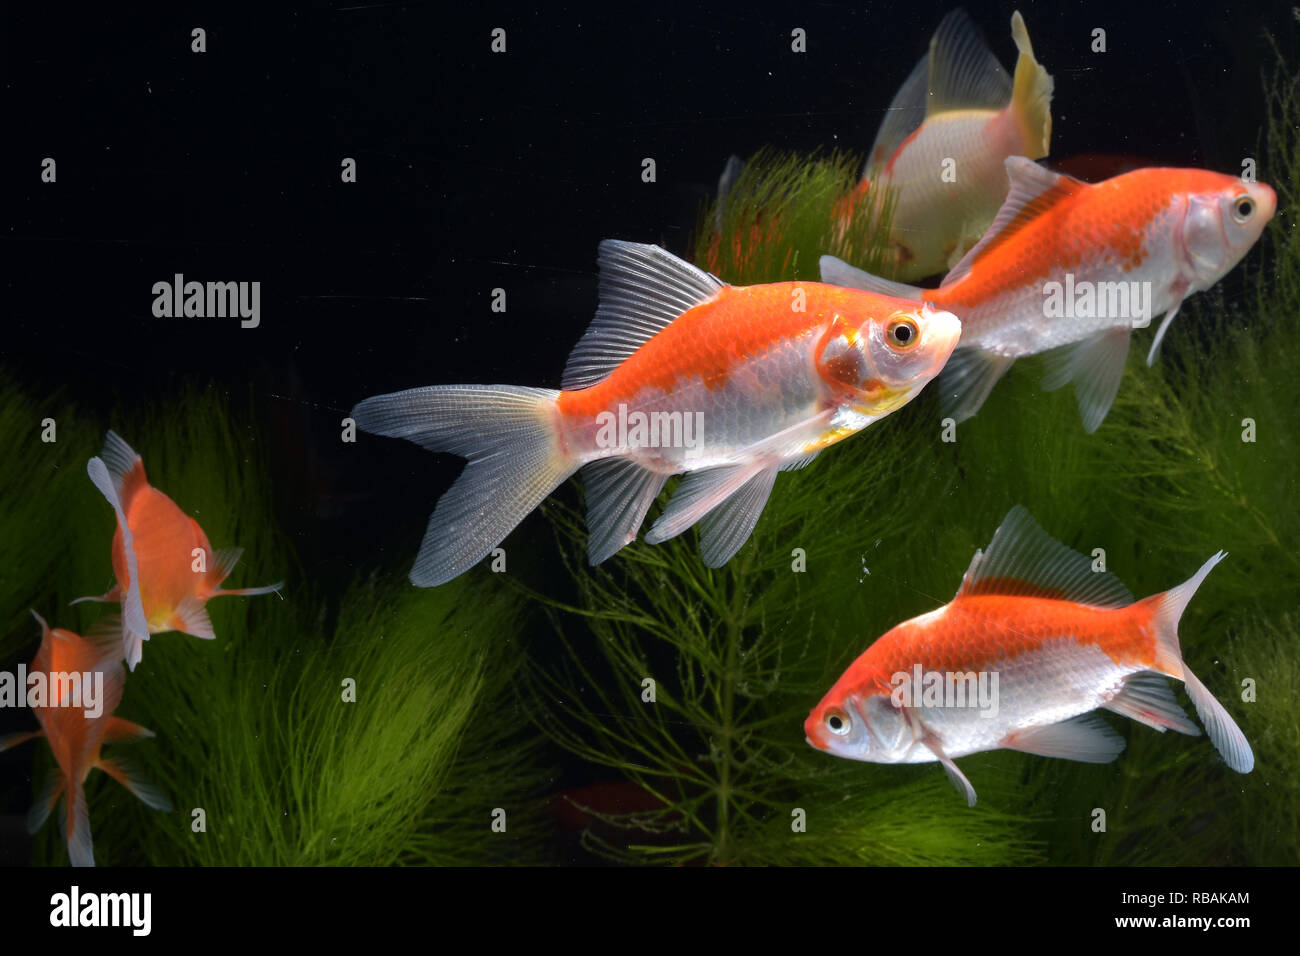 A collection of koi fish swimming in the water Stock Photo